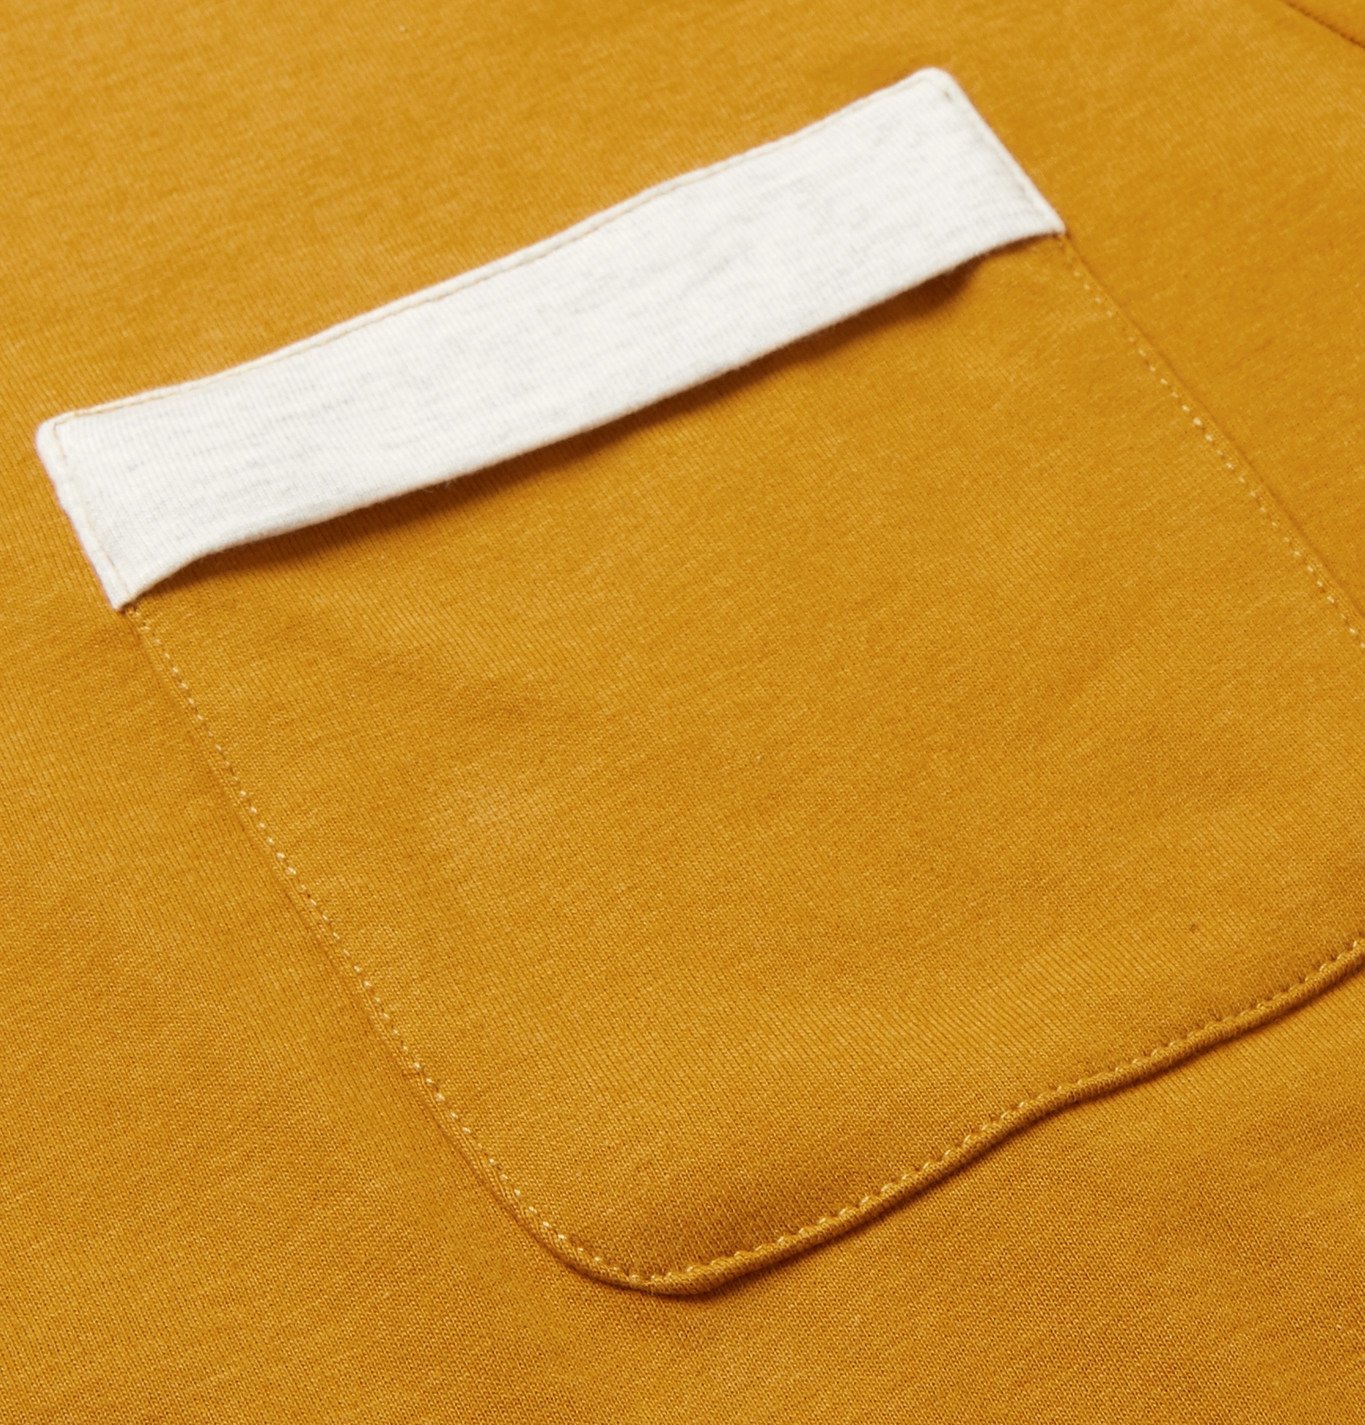 Oliver Spencer - Envelope Contrast-Tipped Cotton-Jersey T-Shirt - Yellow